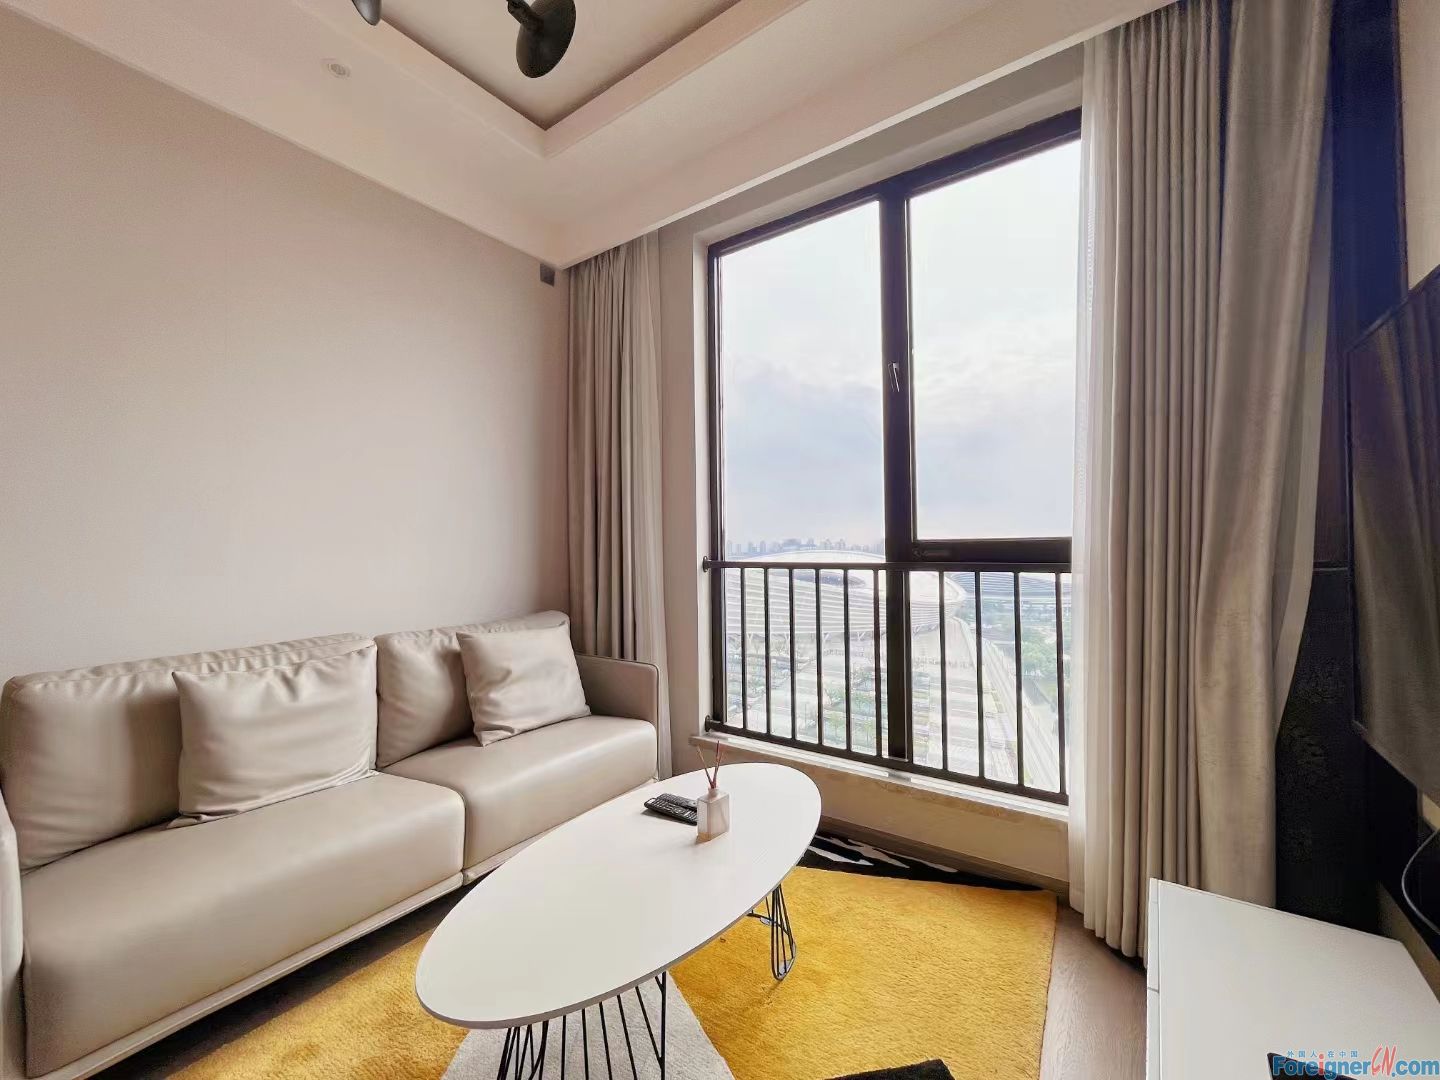  New !!! Serviced apartment Glory Mansion to rent in SIP/ 2 bedrooms, 1 bathroom/Suzhou SSIS/OCAC/SIPFLS/Nearby Olympic Center,Park，Subway Station，A lot of restaurants,Gym 